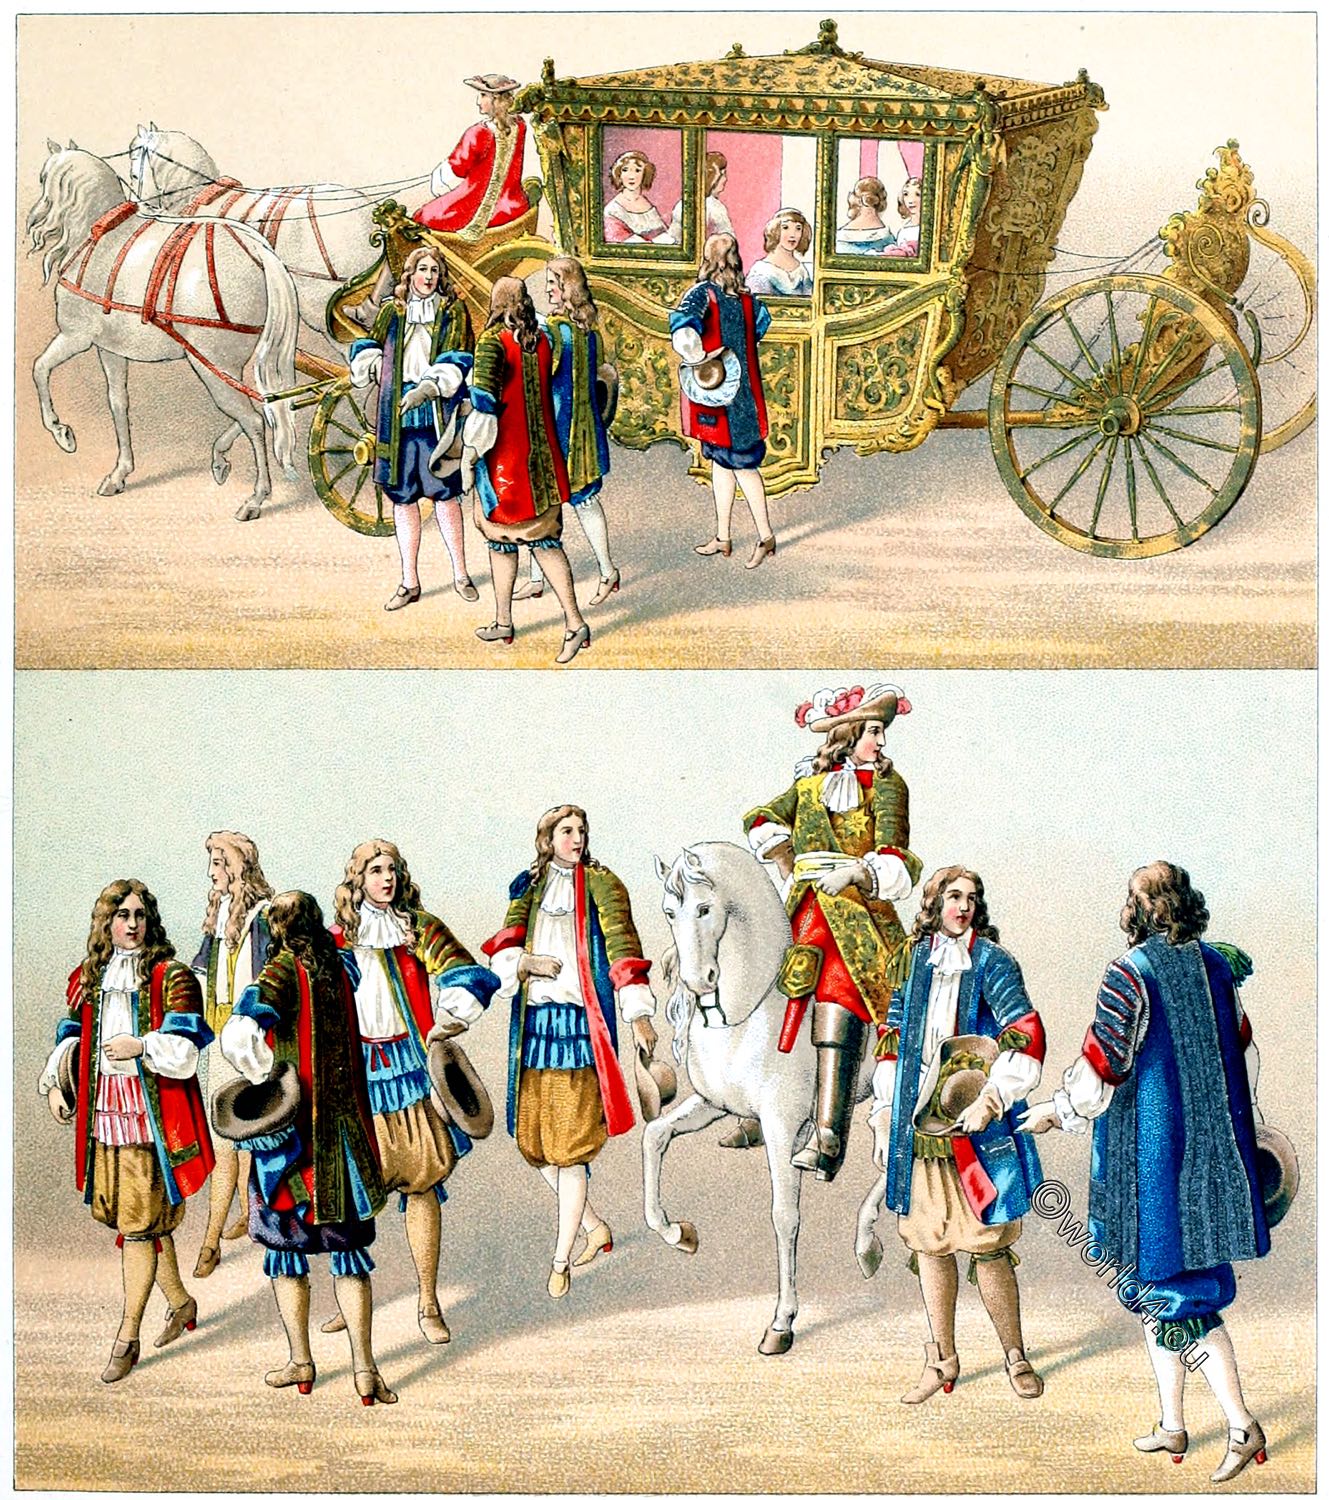 Louis XIV and the officers in the livery of the royal house.